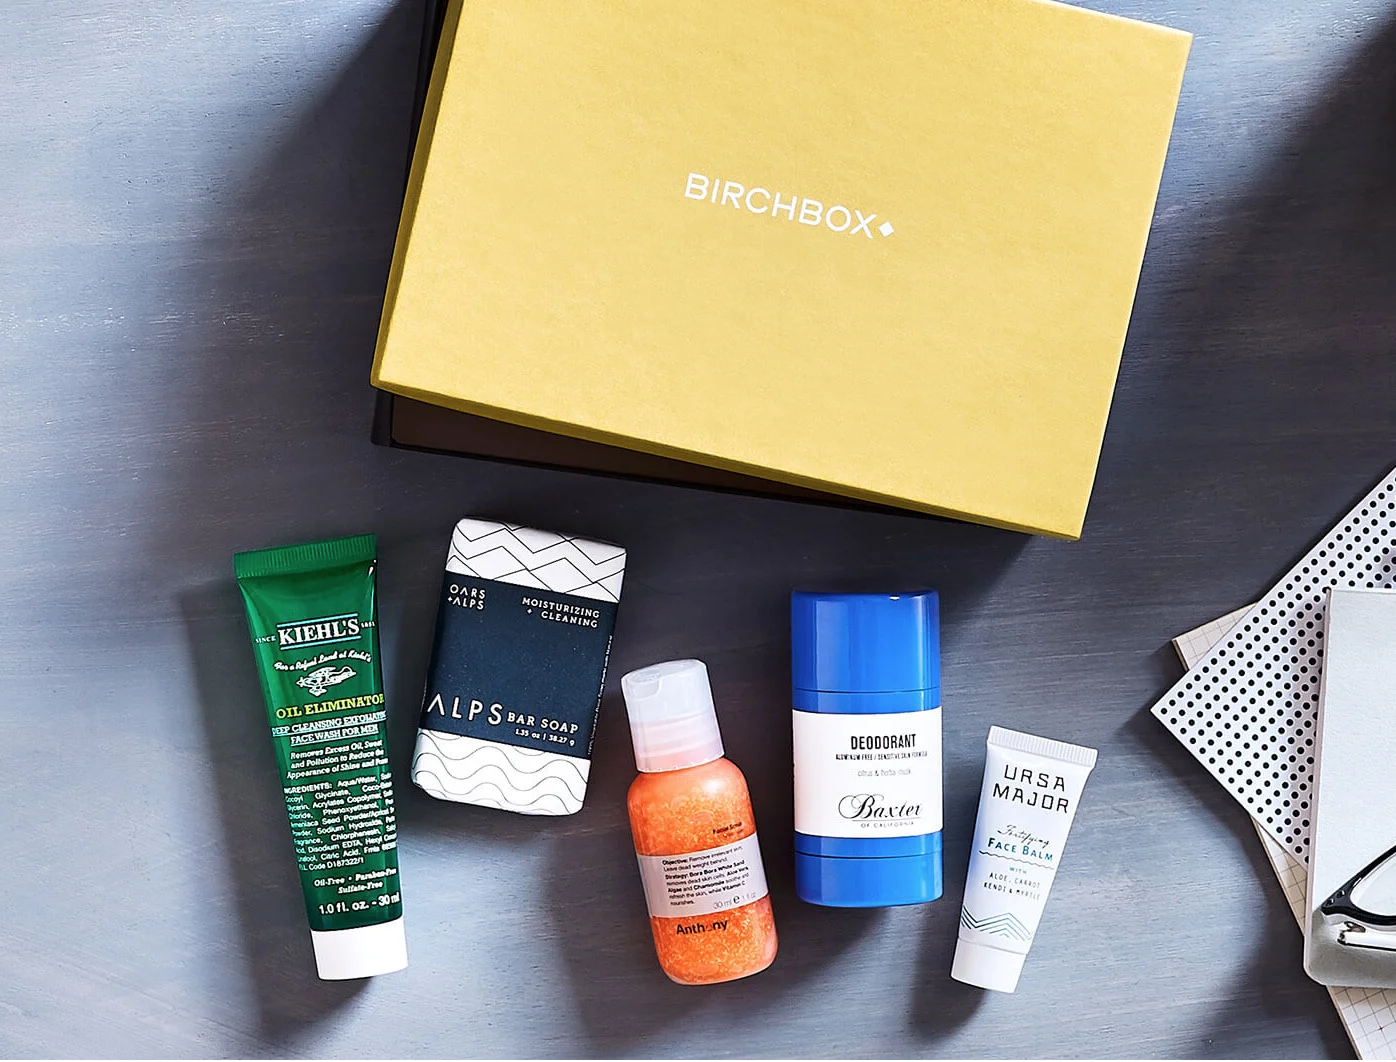 Birchbox Grooming Coupon – Get A 6-Month Subscription for $9 a Box!